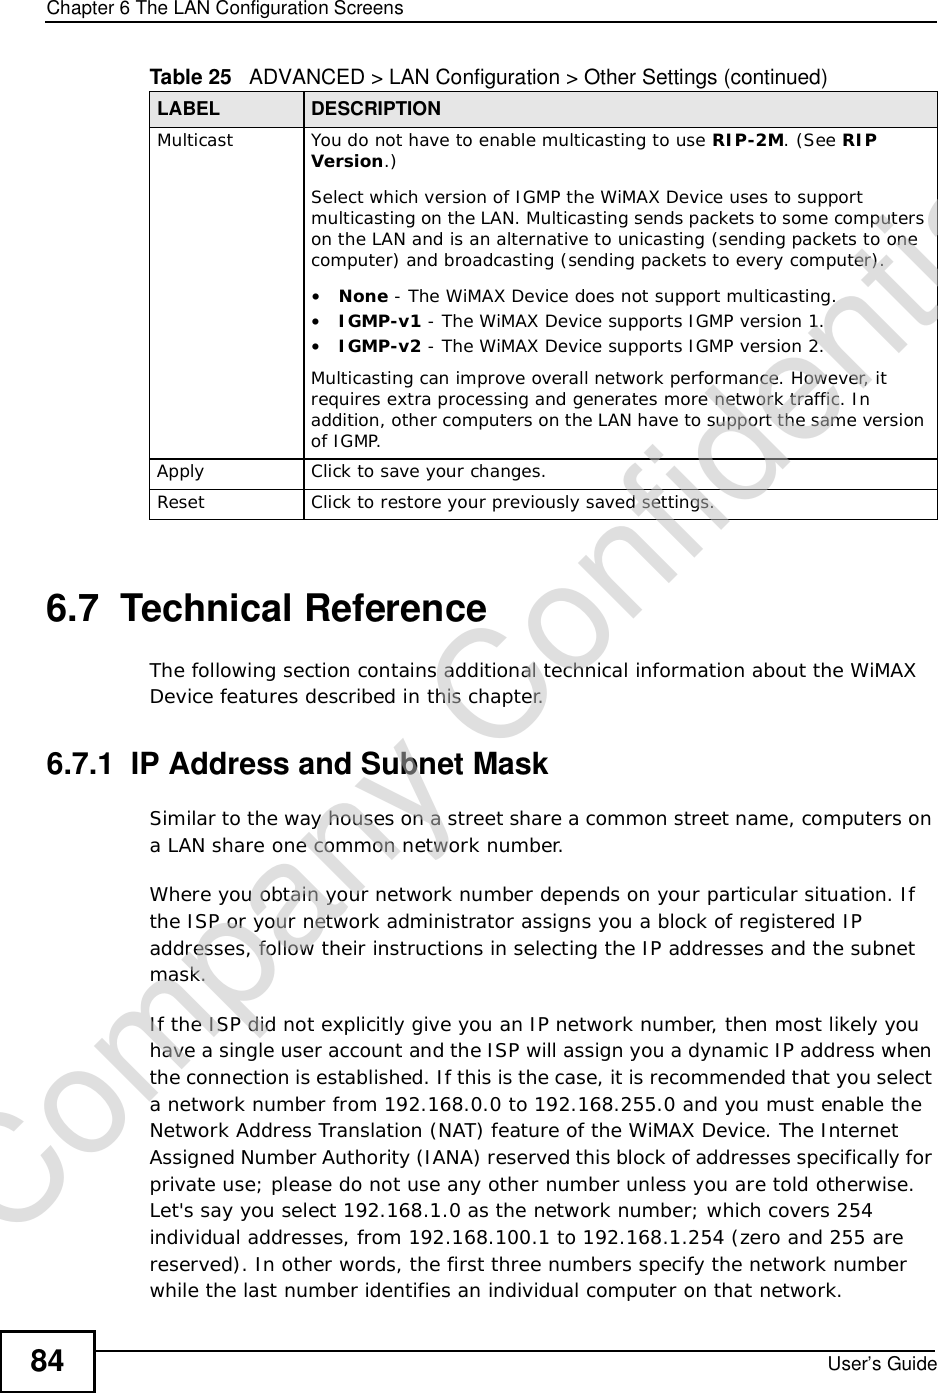 Chapter 6The LAN Configuration ScreensUser’s Guide846.7  Technical ReferenceThe following section contains additional technical information about the WiMAX Device features described in this chapter.6.7.1  IP Address and Subnet MaskSimilar to the way houses on a street share a common street name, computers on a LAN share one common network number.Where you obtain your network number depends on your particular situation. If the ISP or your network administrator assigns you a block of registered IP addresses, follow their instructions in selecting the IP addresses and the subnet mask.If the ISP did not explicitly give you an IP network number, then most likely you have a single user account and the ISP will assign you a dynamic IP address when the connection is established. If this is the case, it is recommended that you select a network number from 192.168.0.0 to 192.168.255.0 and you must enable the Network Address Translation (NAT) feature of the WiMAX Device. The Internet Assigned Number Authority (IANA) reserved this block of addresses specifically for private use; please do not use any other number unless you are told otherwise. Let&apos;s say you select 192.168.1.0 as the network number; which covers 254 individual addresses, from 192.168.100.1 to 192.168.1.254 (zero and 255 are reserved). In other words, the first three numbers specify the network number while the last number identifies an individual computer on that network.Multicast You do not have to enable multicasting to use RIP-2M. (See RIPVersion.)Select which version of IGMP the WiMAX Device uses to support multicasting on the LAN. Multicasting sends packets to some computers on the LAN and is an alternative to unicasting (sending packets to one computer) and broadcasting (sending packets to every computer).•None - The WiMAX Device does not support multicasting.•IGMP-v1 - The WiMAX Device supports IGMP version 1.•IGMP-v2 - The WiMAX Device supports IGMP version 2.Multicasting can improve overall network performance. However, it requires extra processing and generates more network traffic. In addition, other computers on the LAN have to support the same version of IGMP.Apply Click to save your changes.Reset Click to restore your previously saved settings.Table 25   ADVANCED &gt; LAN Configuration &gt; Other Settings (continued)LABEL DESCRIPTIONCompany Confidential